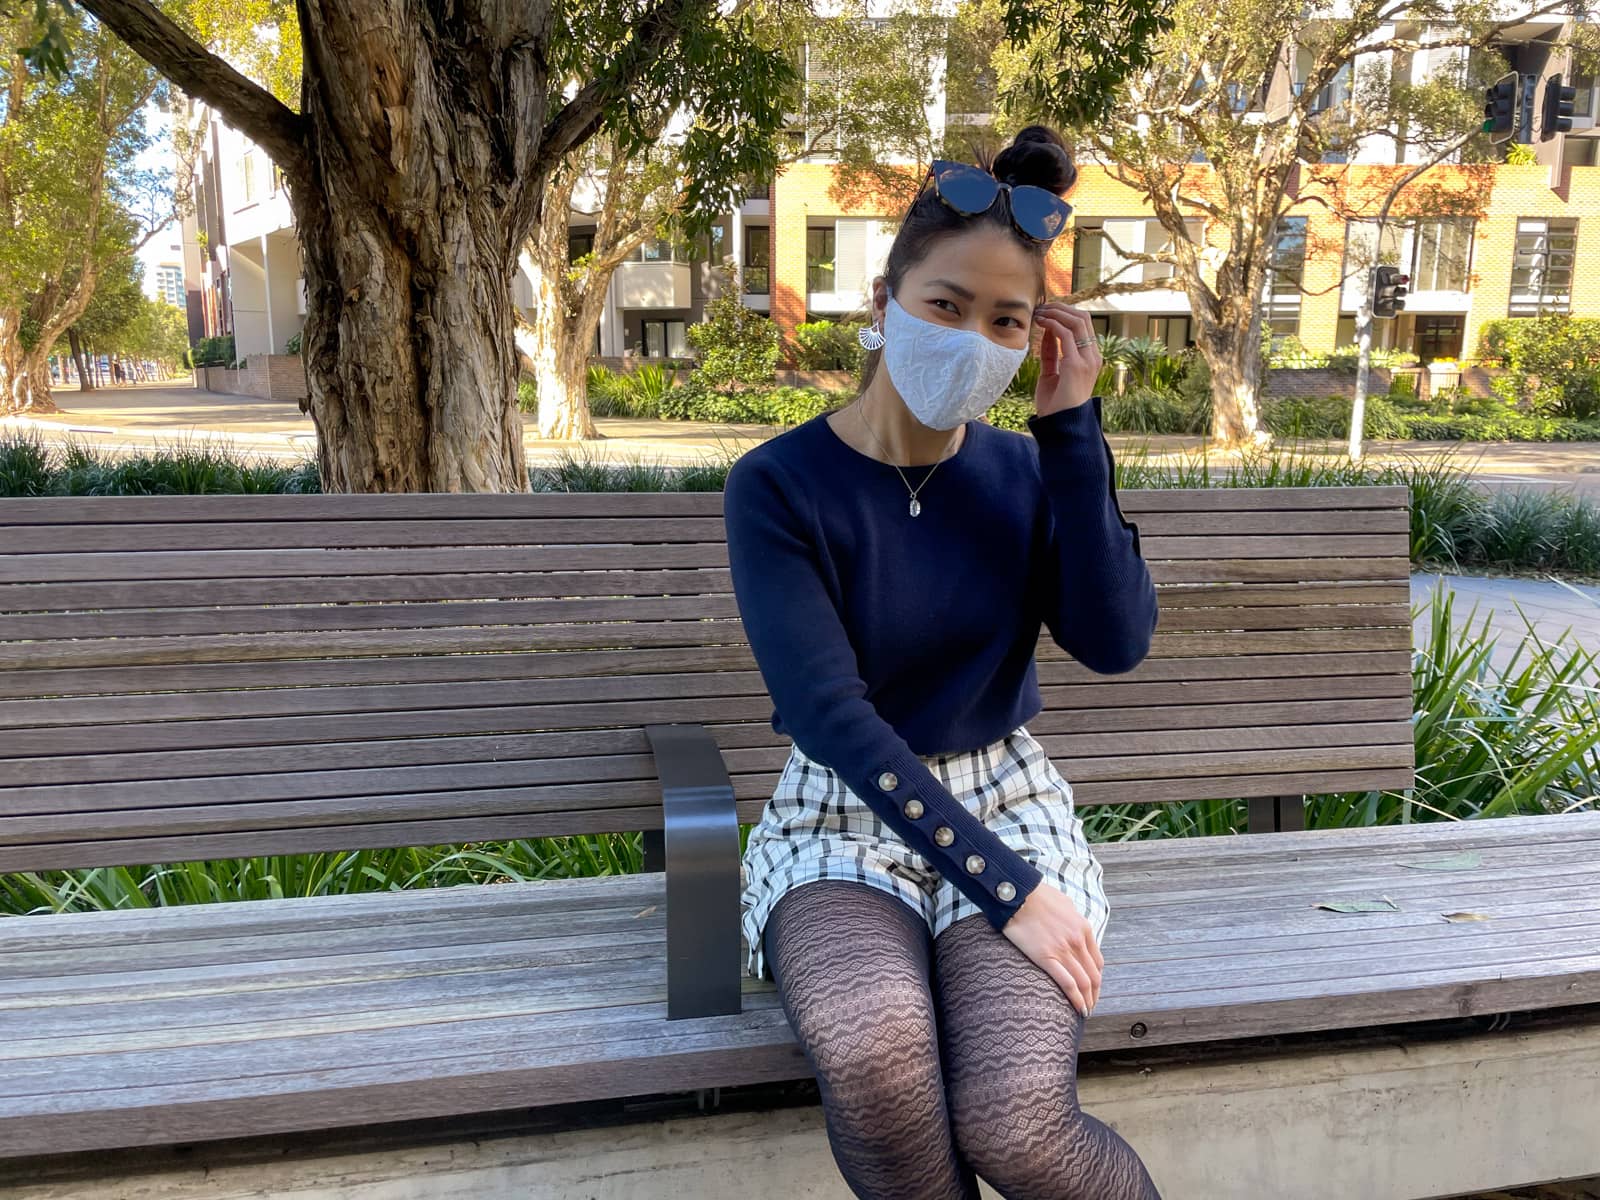 An Asian woman sitting on a wooden bench. She has dark hair tied back in a high bun. She is wearing a navy sweater with button details on the lower part of the sleeves, black and white checkered shorts, and lace patterned tights. She is wearing a lace face covering over her nose and mouth, and round sunglasses on top of her head. One of her arms is crossed over and resting on her opposite knee.